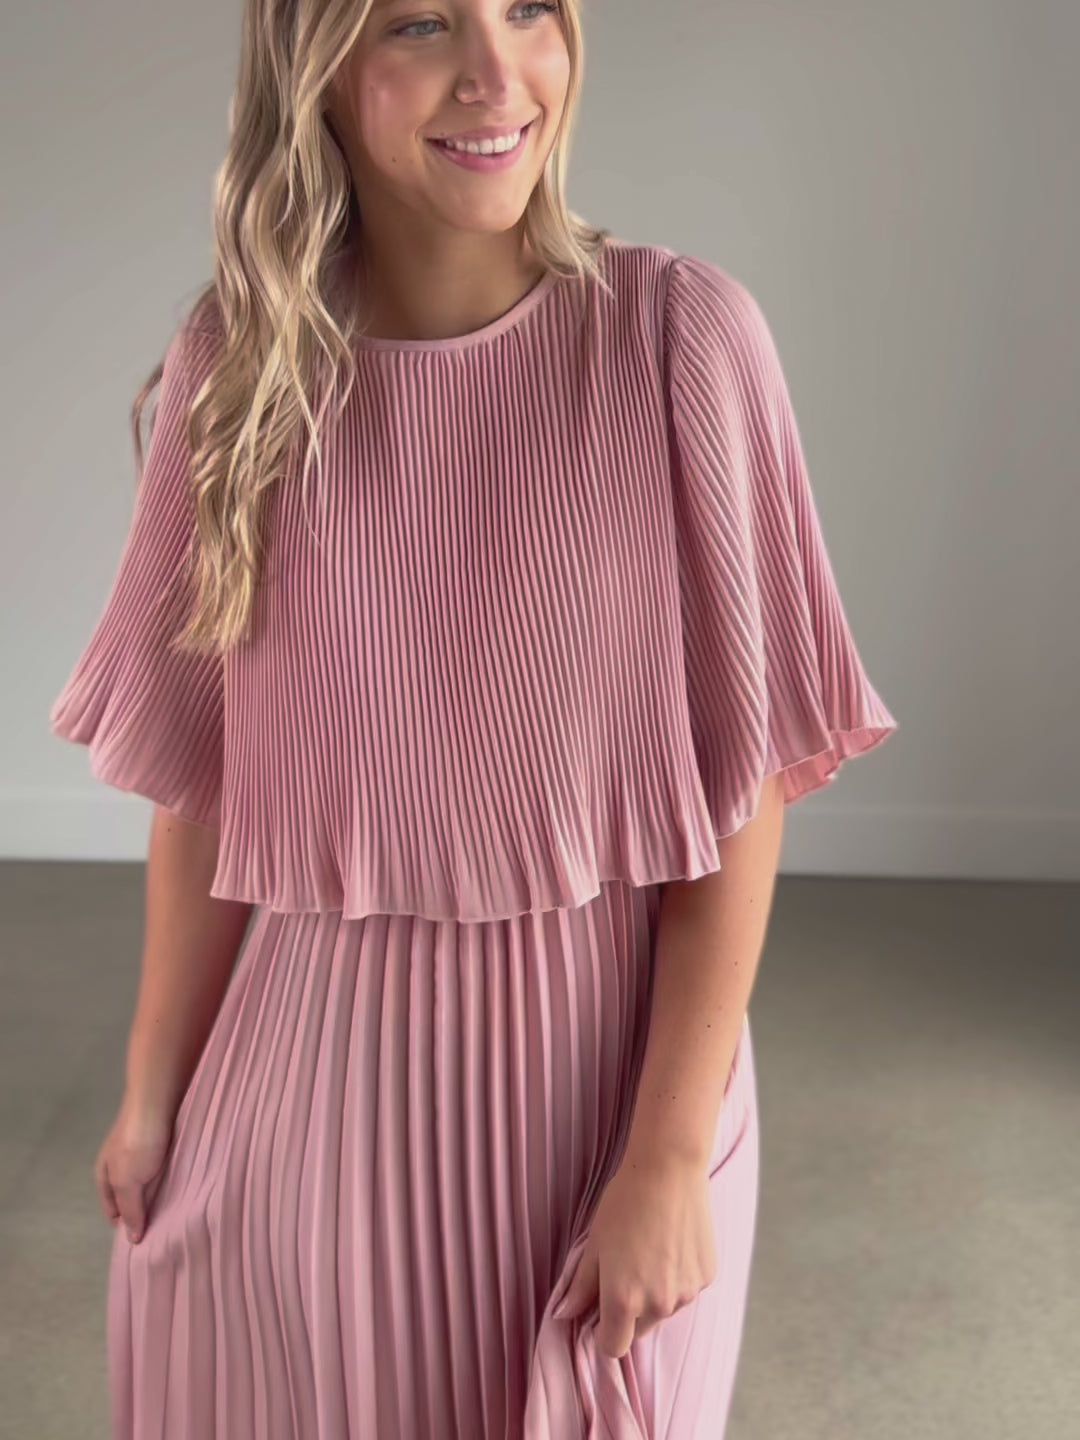 A pleated blush maxi dress with a blouson top and a-line skirt.